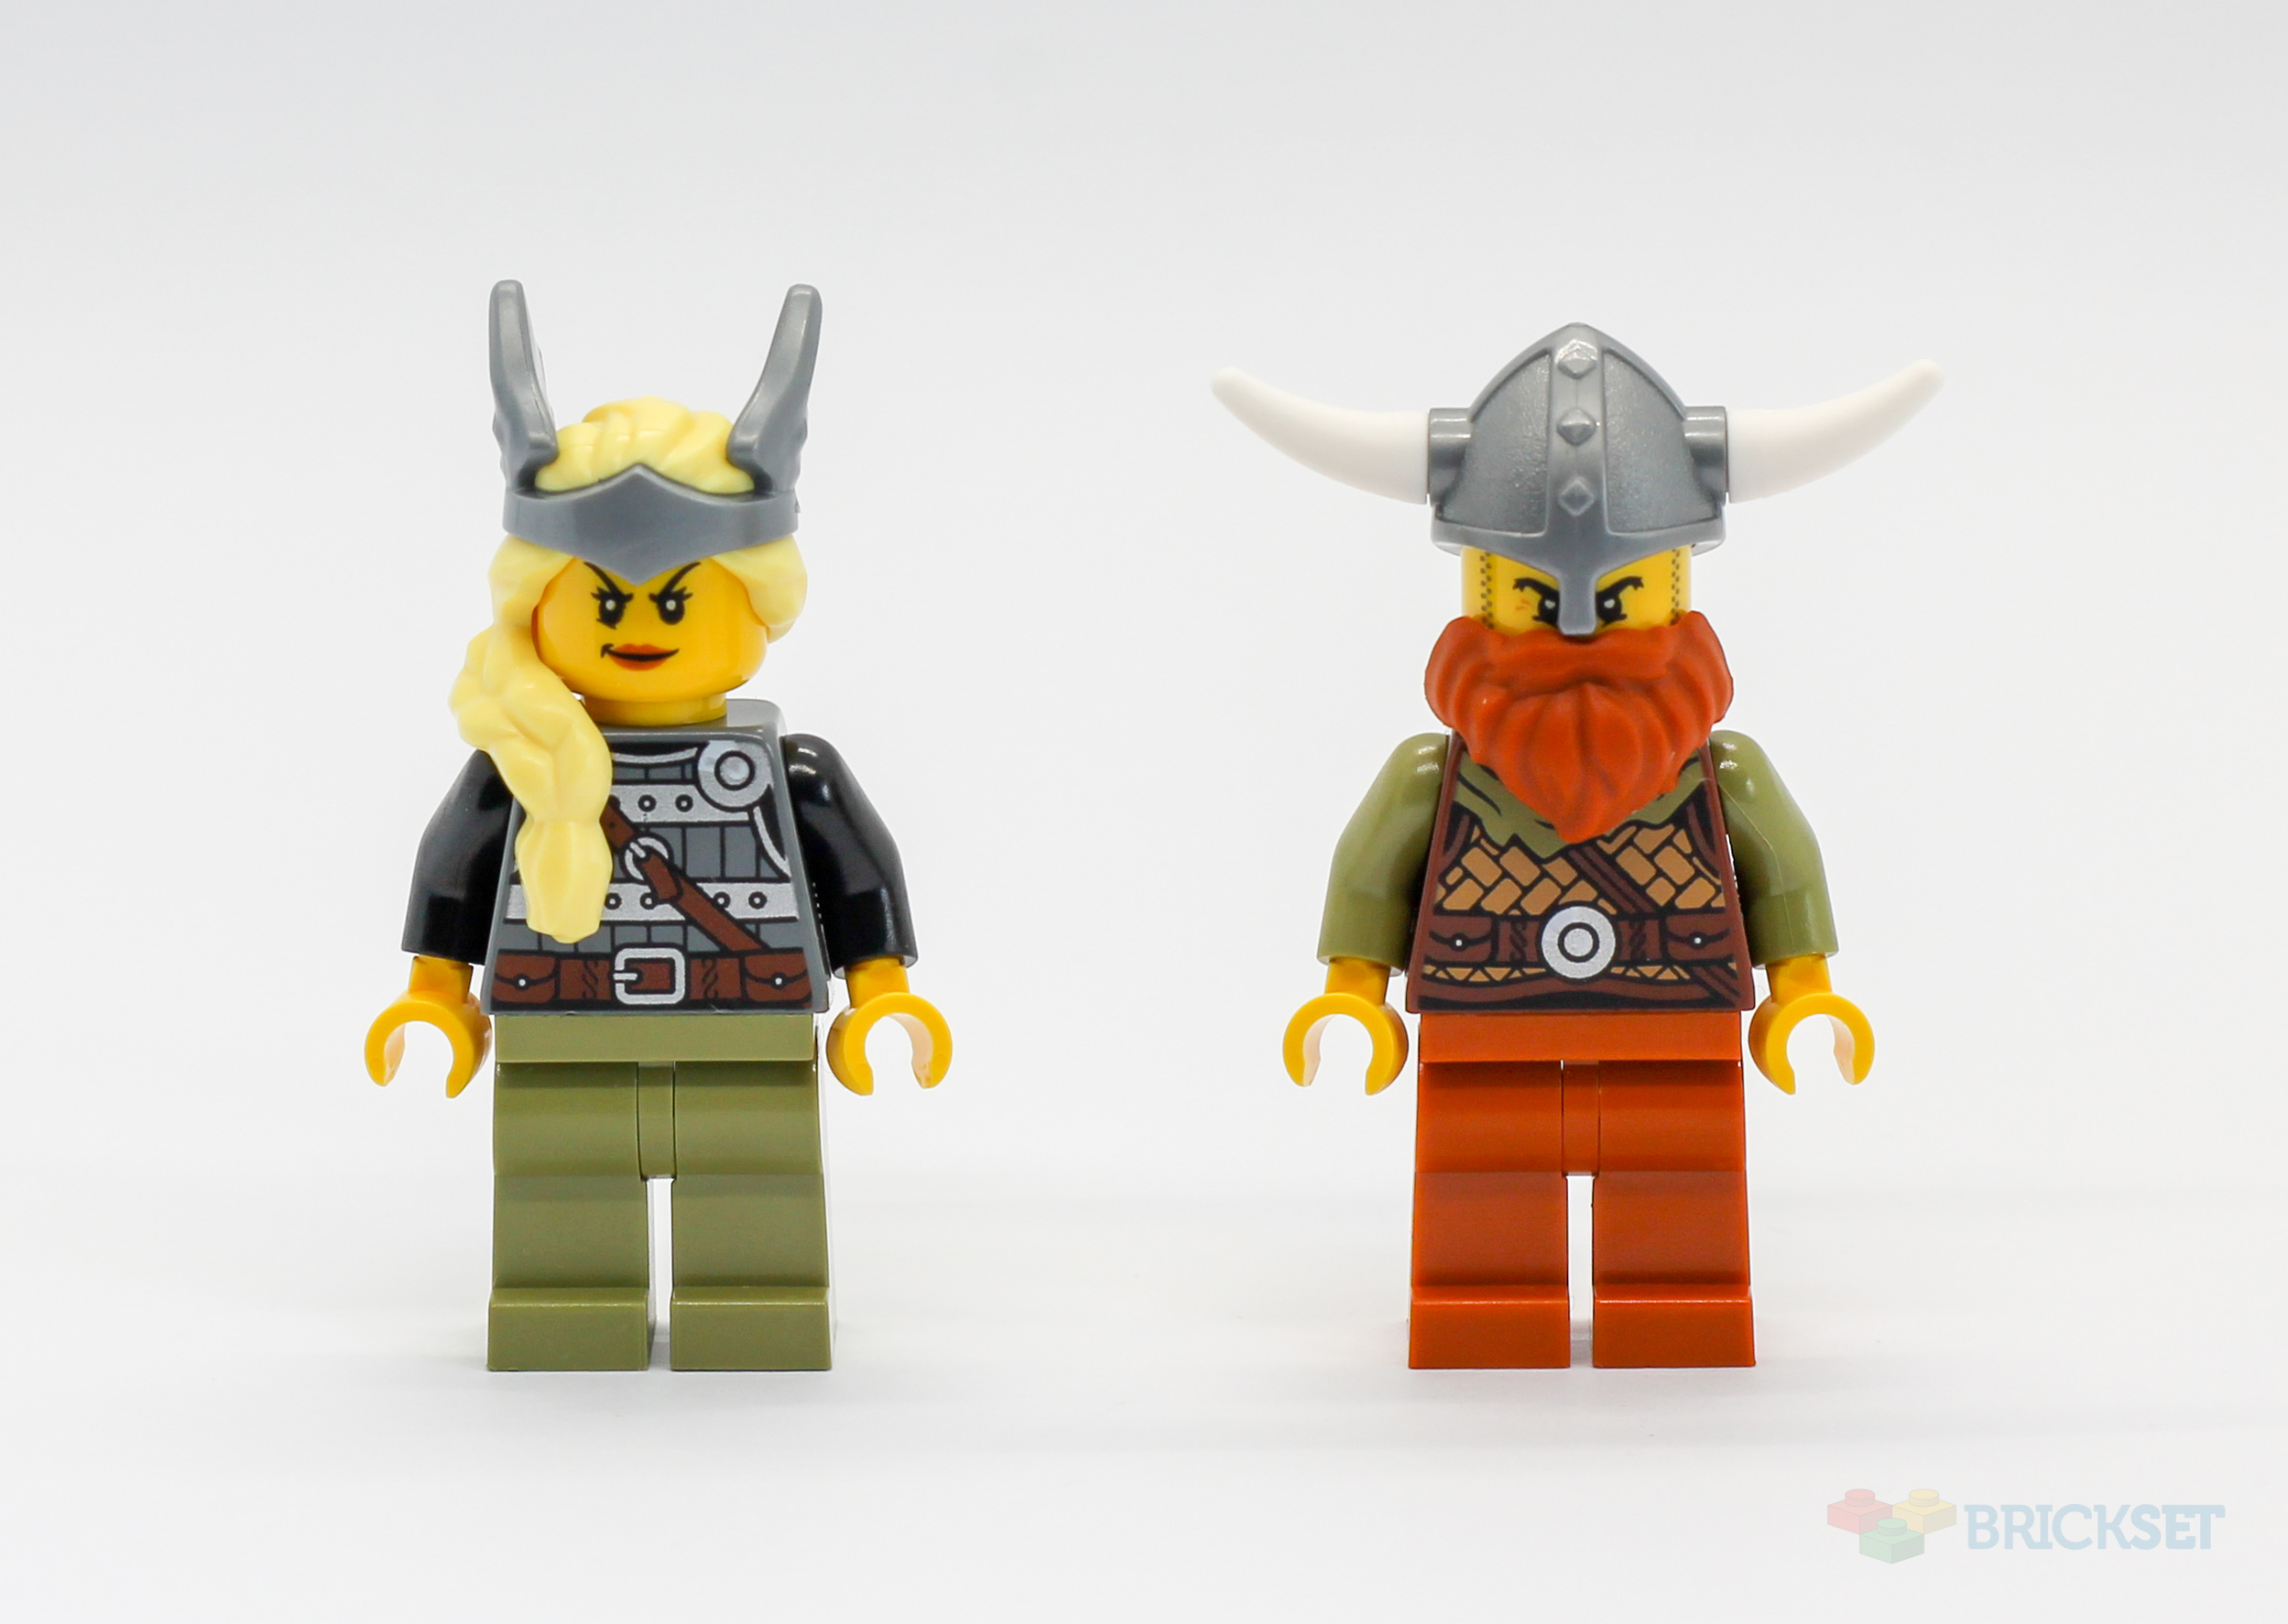 LEGO Ideas - Designed for speed, Viking Longship's are the